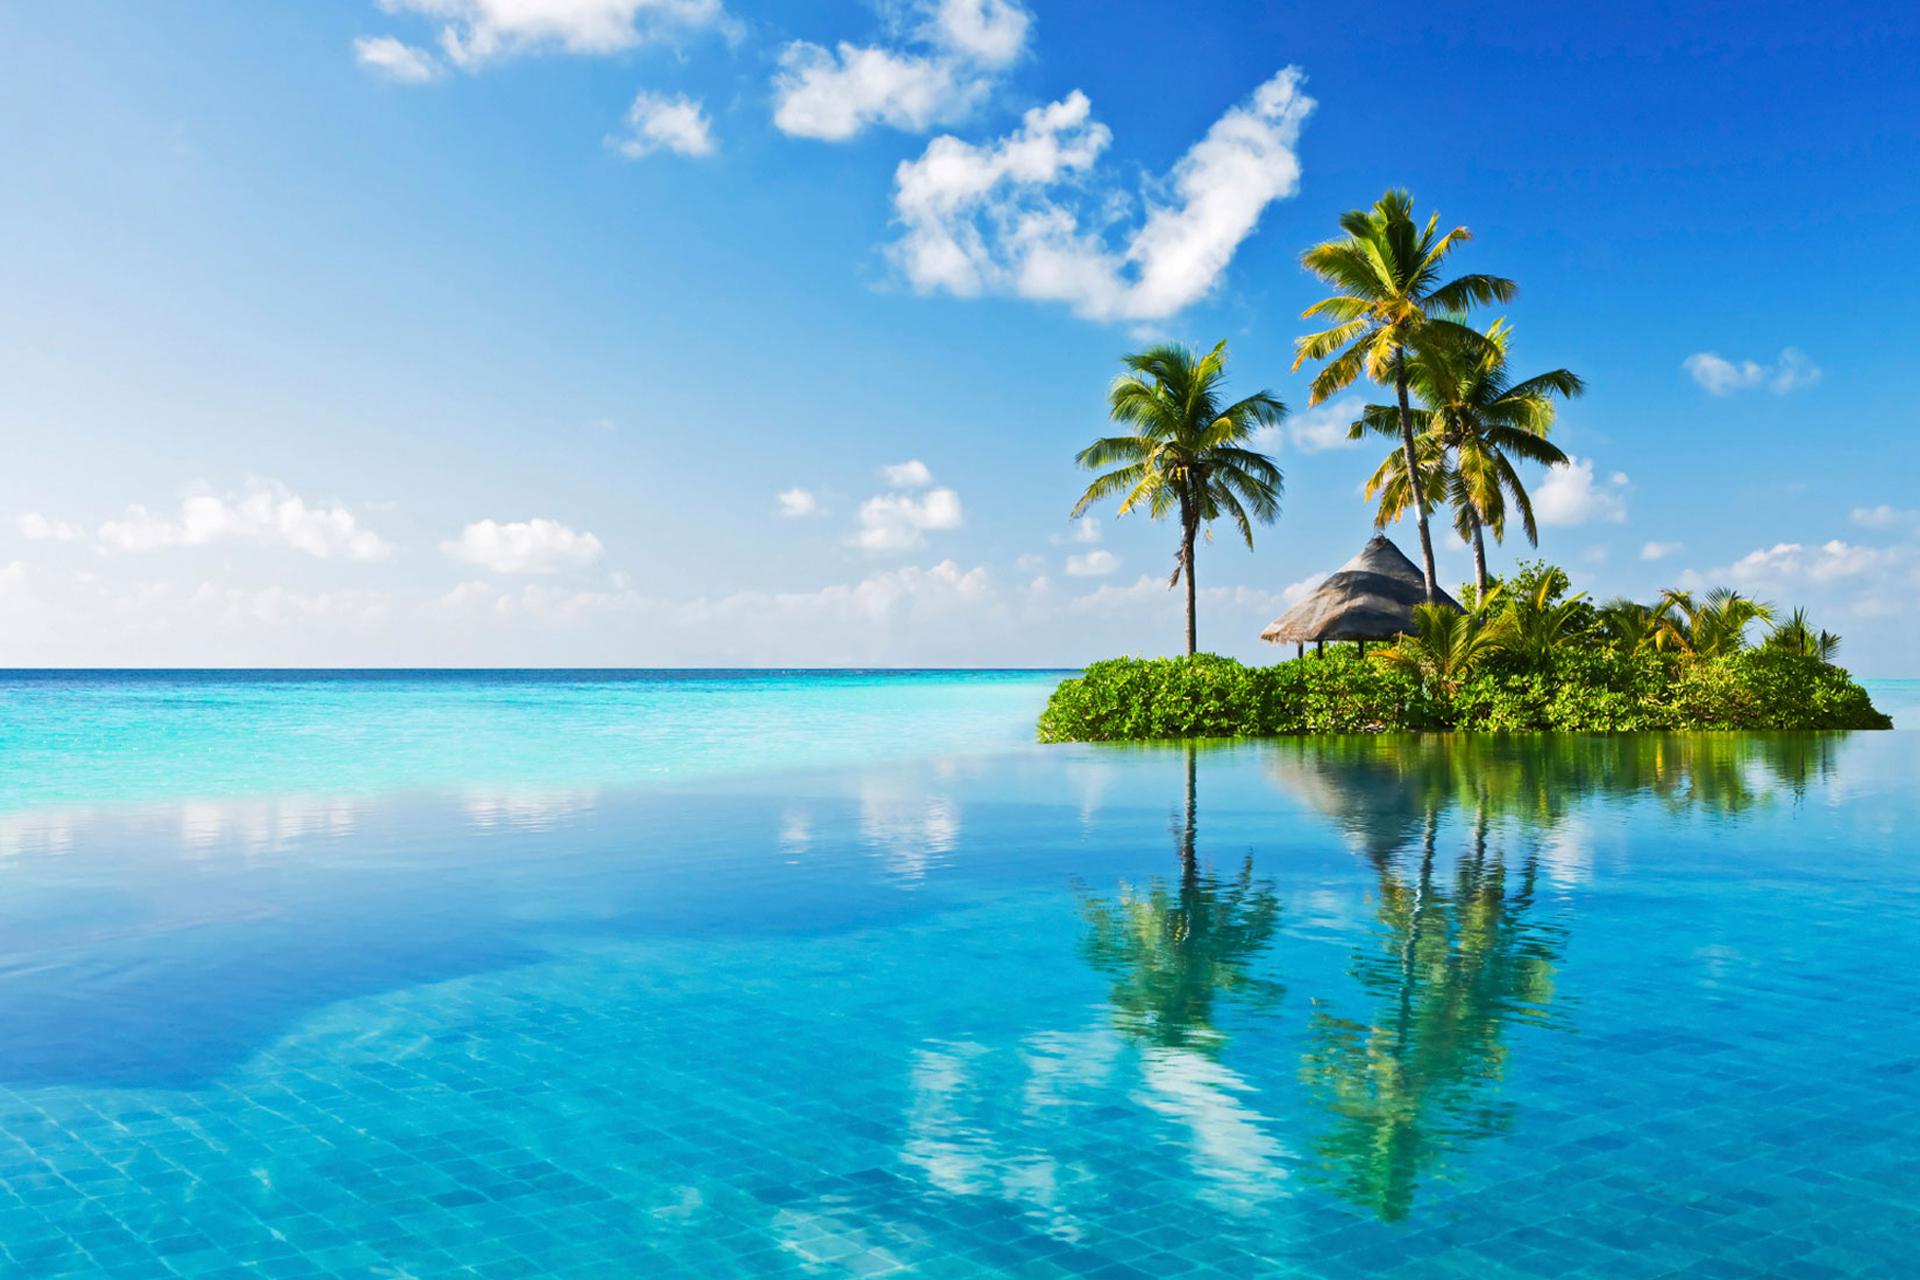 Tropical Island Wallpapers